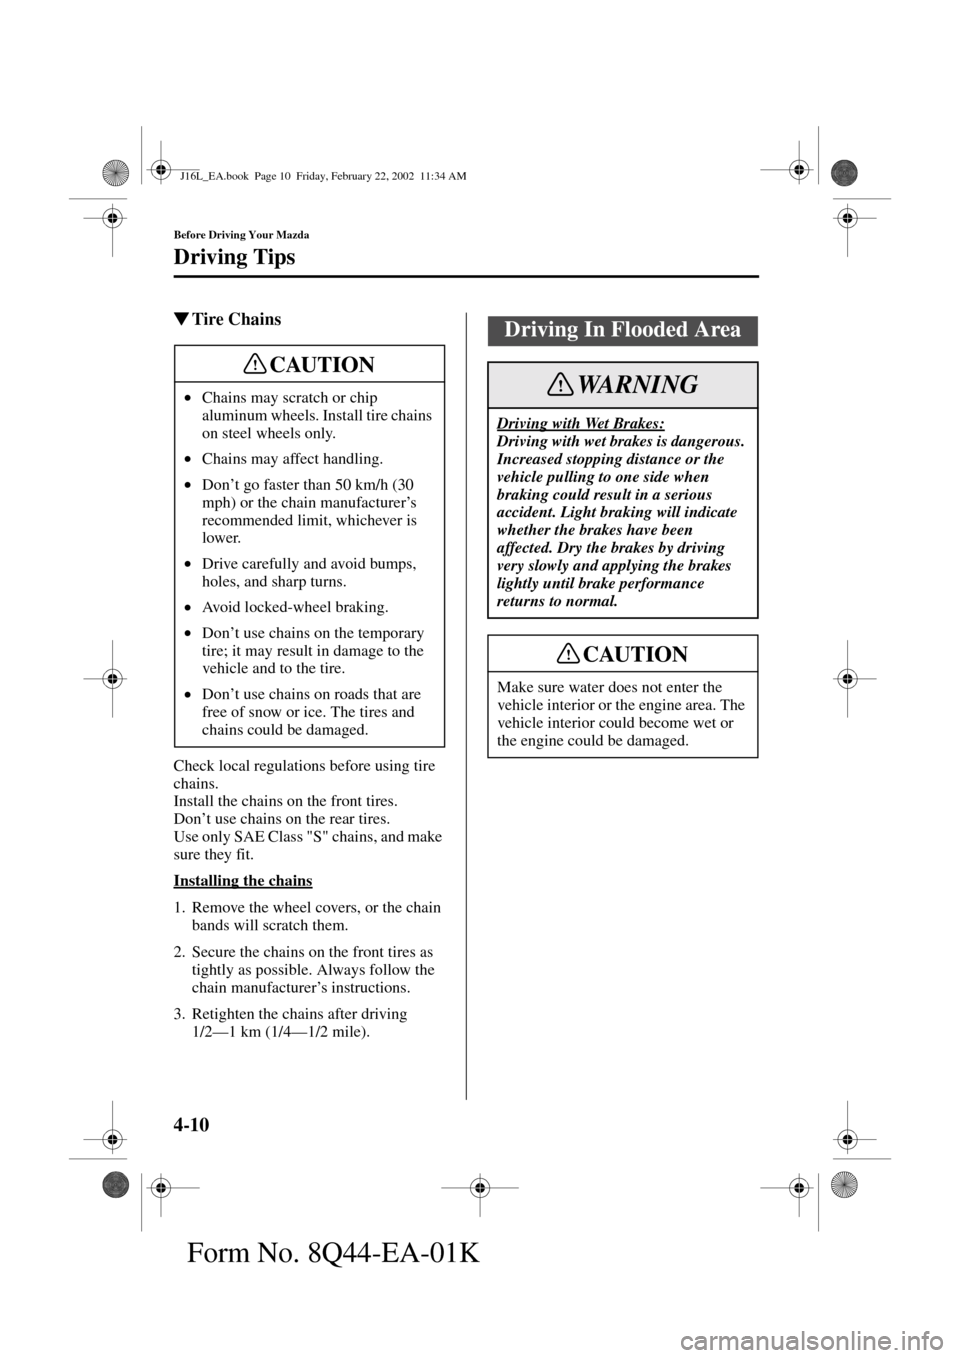 MAZDA MODEL MPV 2002  Owners Manual (in English) 4-10
Before Driving Your Mazda
Driving Tips
Form No. 8Q44-EA-01K
Tire Chains
Check local regulations before using tire 
chains.
Install the chains on the front tires.
Don’t use chains on the rear t